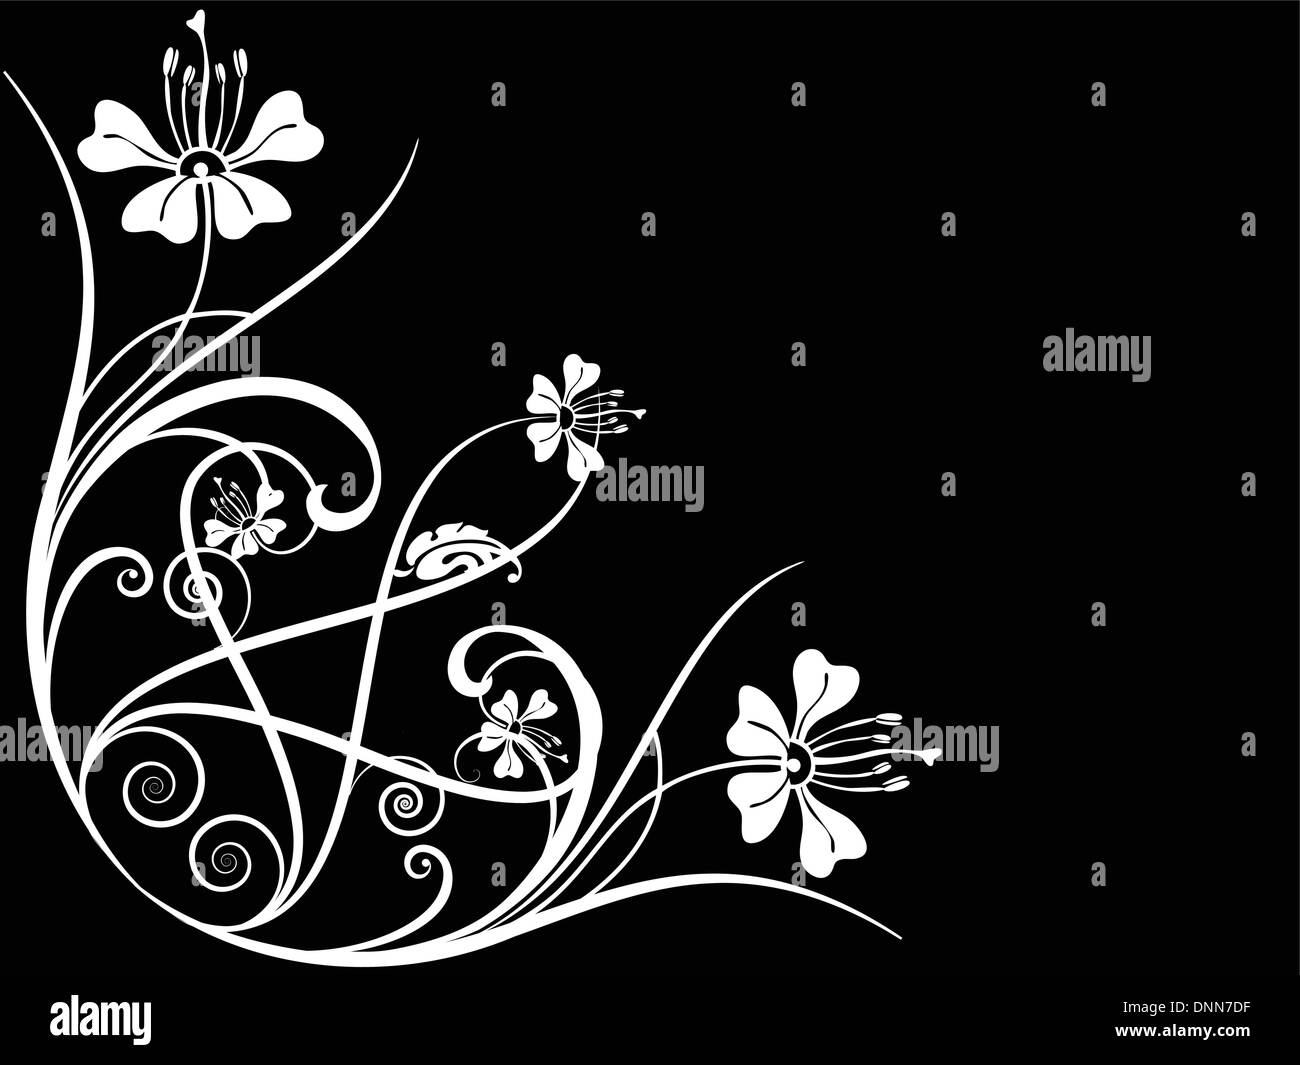 Abstract floral design Stock Vector